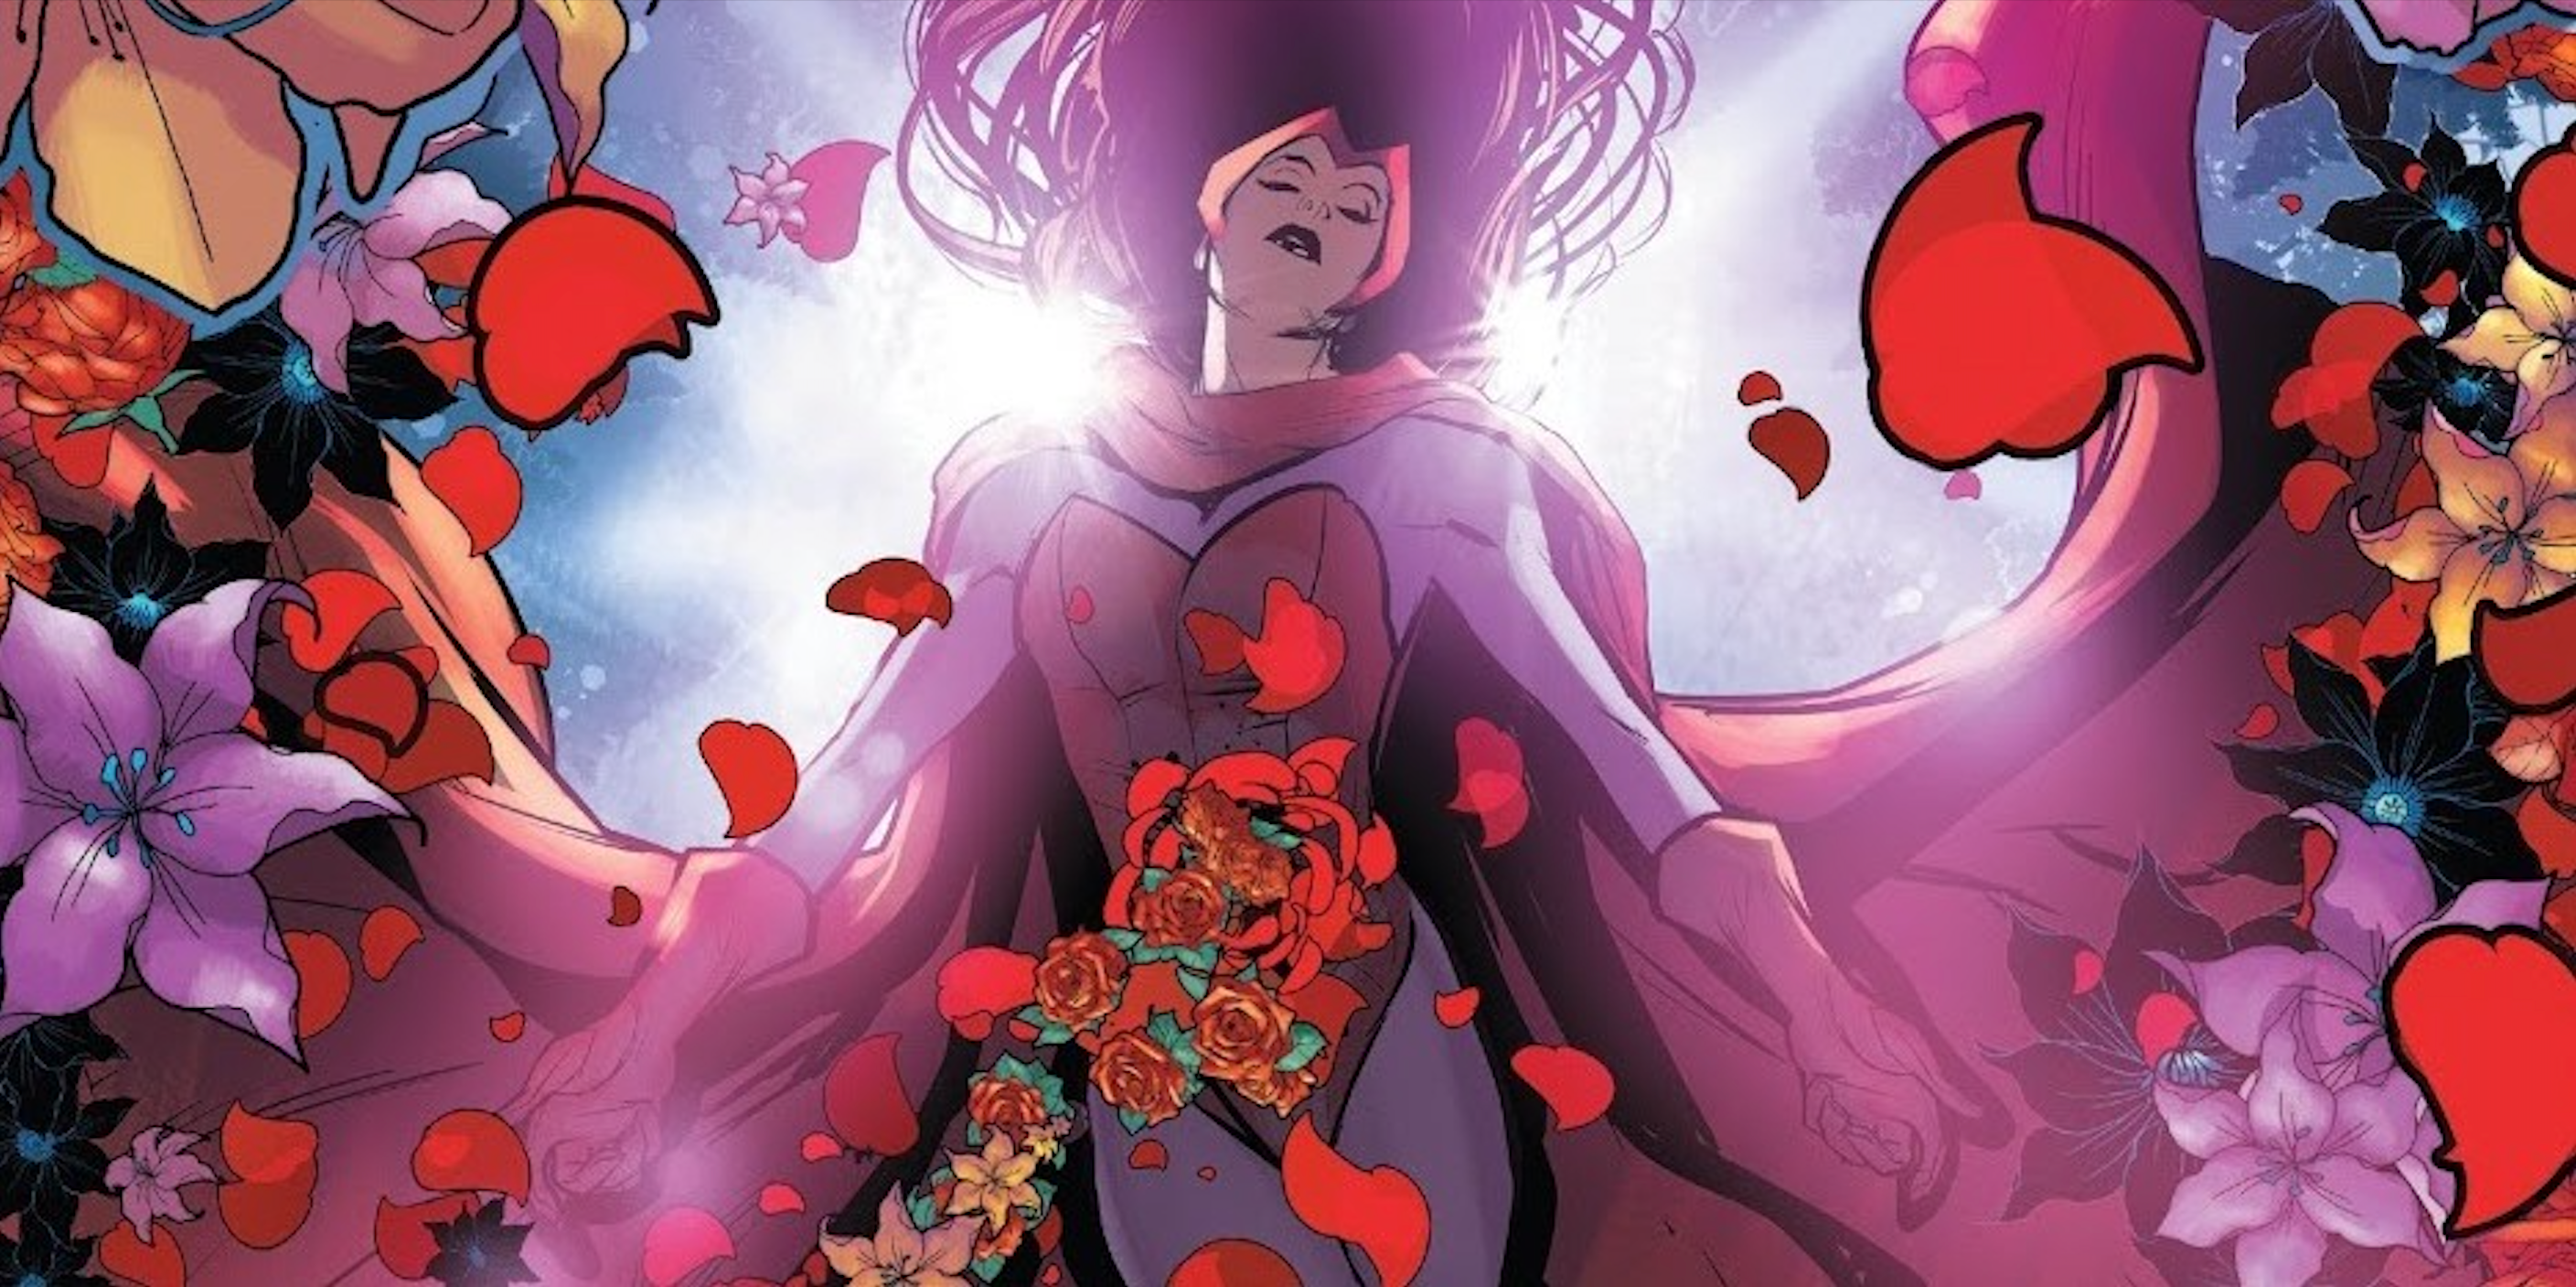 Rose petals erupt from Scarlet Witch after her death in Marvel Comics.